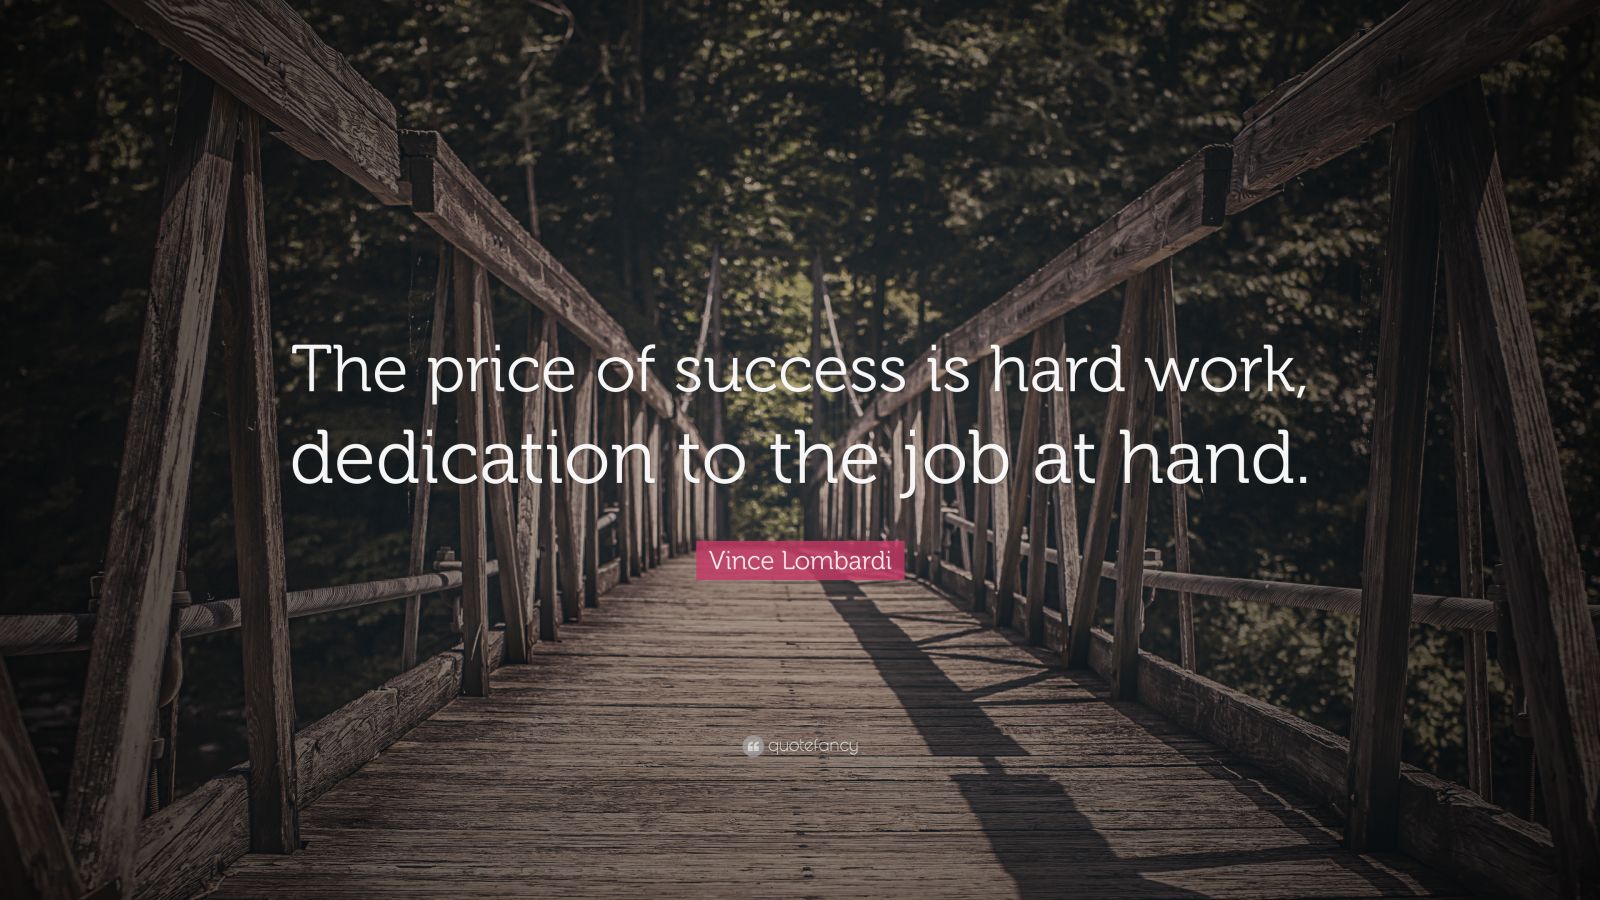 Vince Lombardi Quote “The price of success is hard work